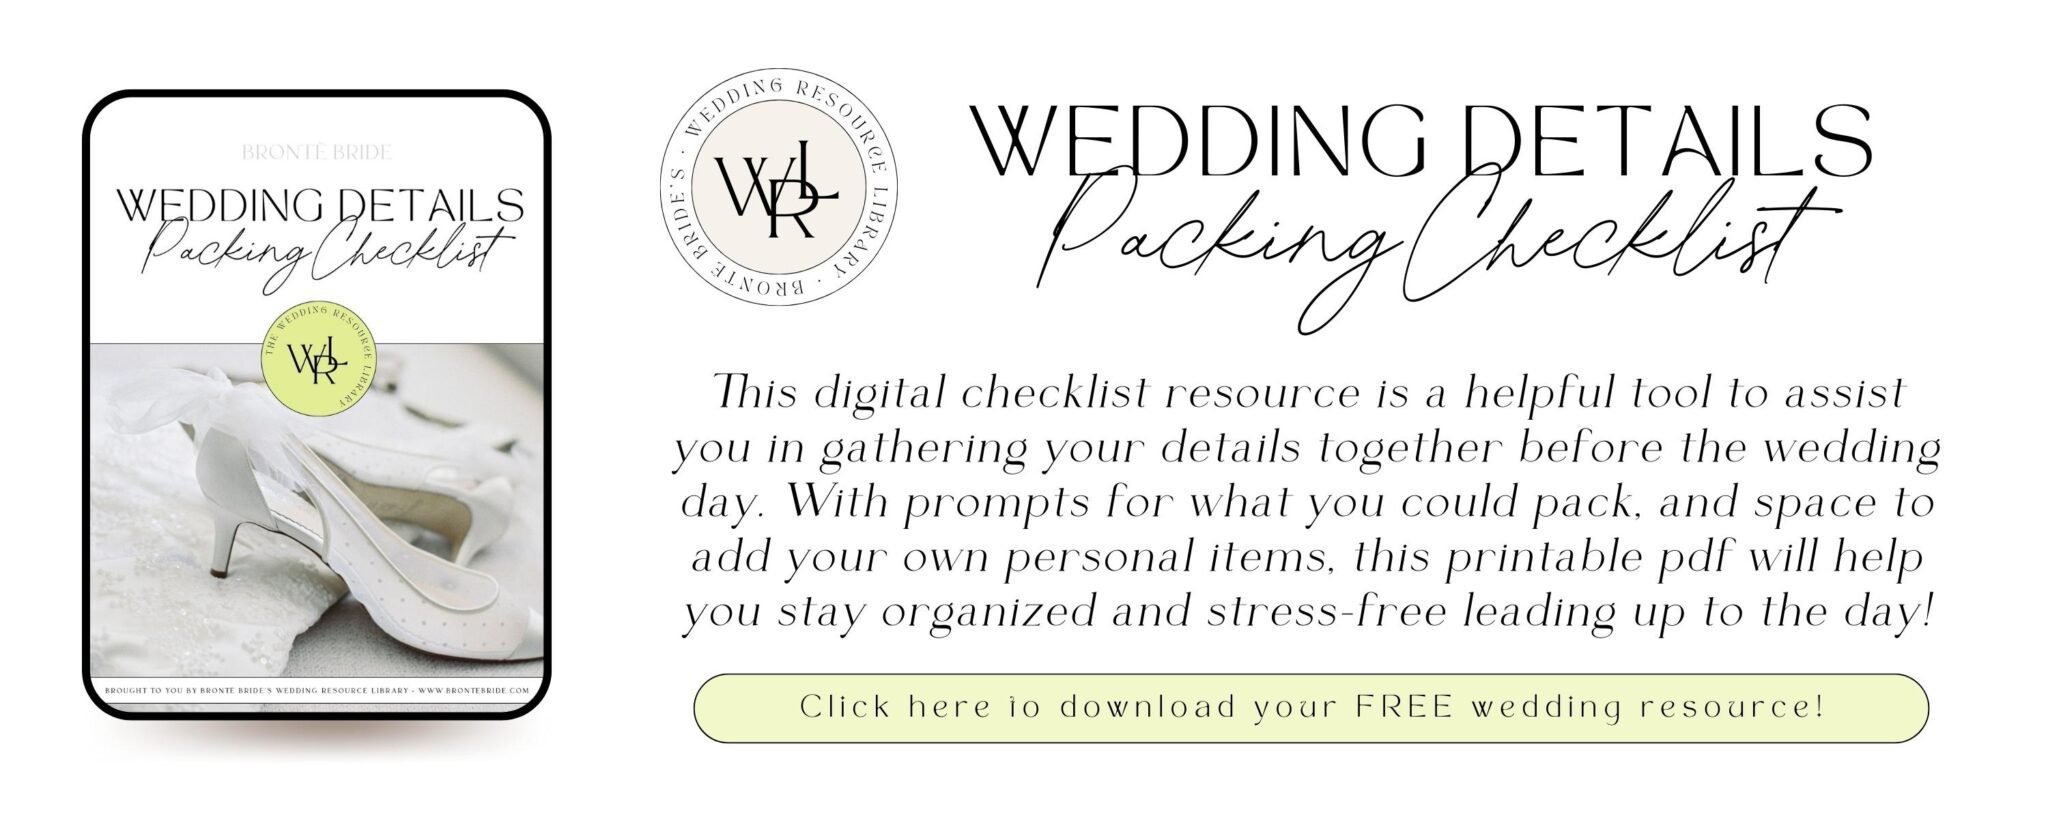 Wedding Timeline Tips, Getting ready tips and wedding resource from Brontë Bride's Wedding Resource Library